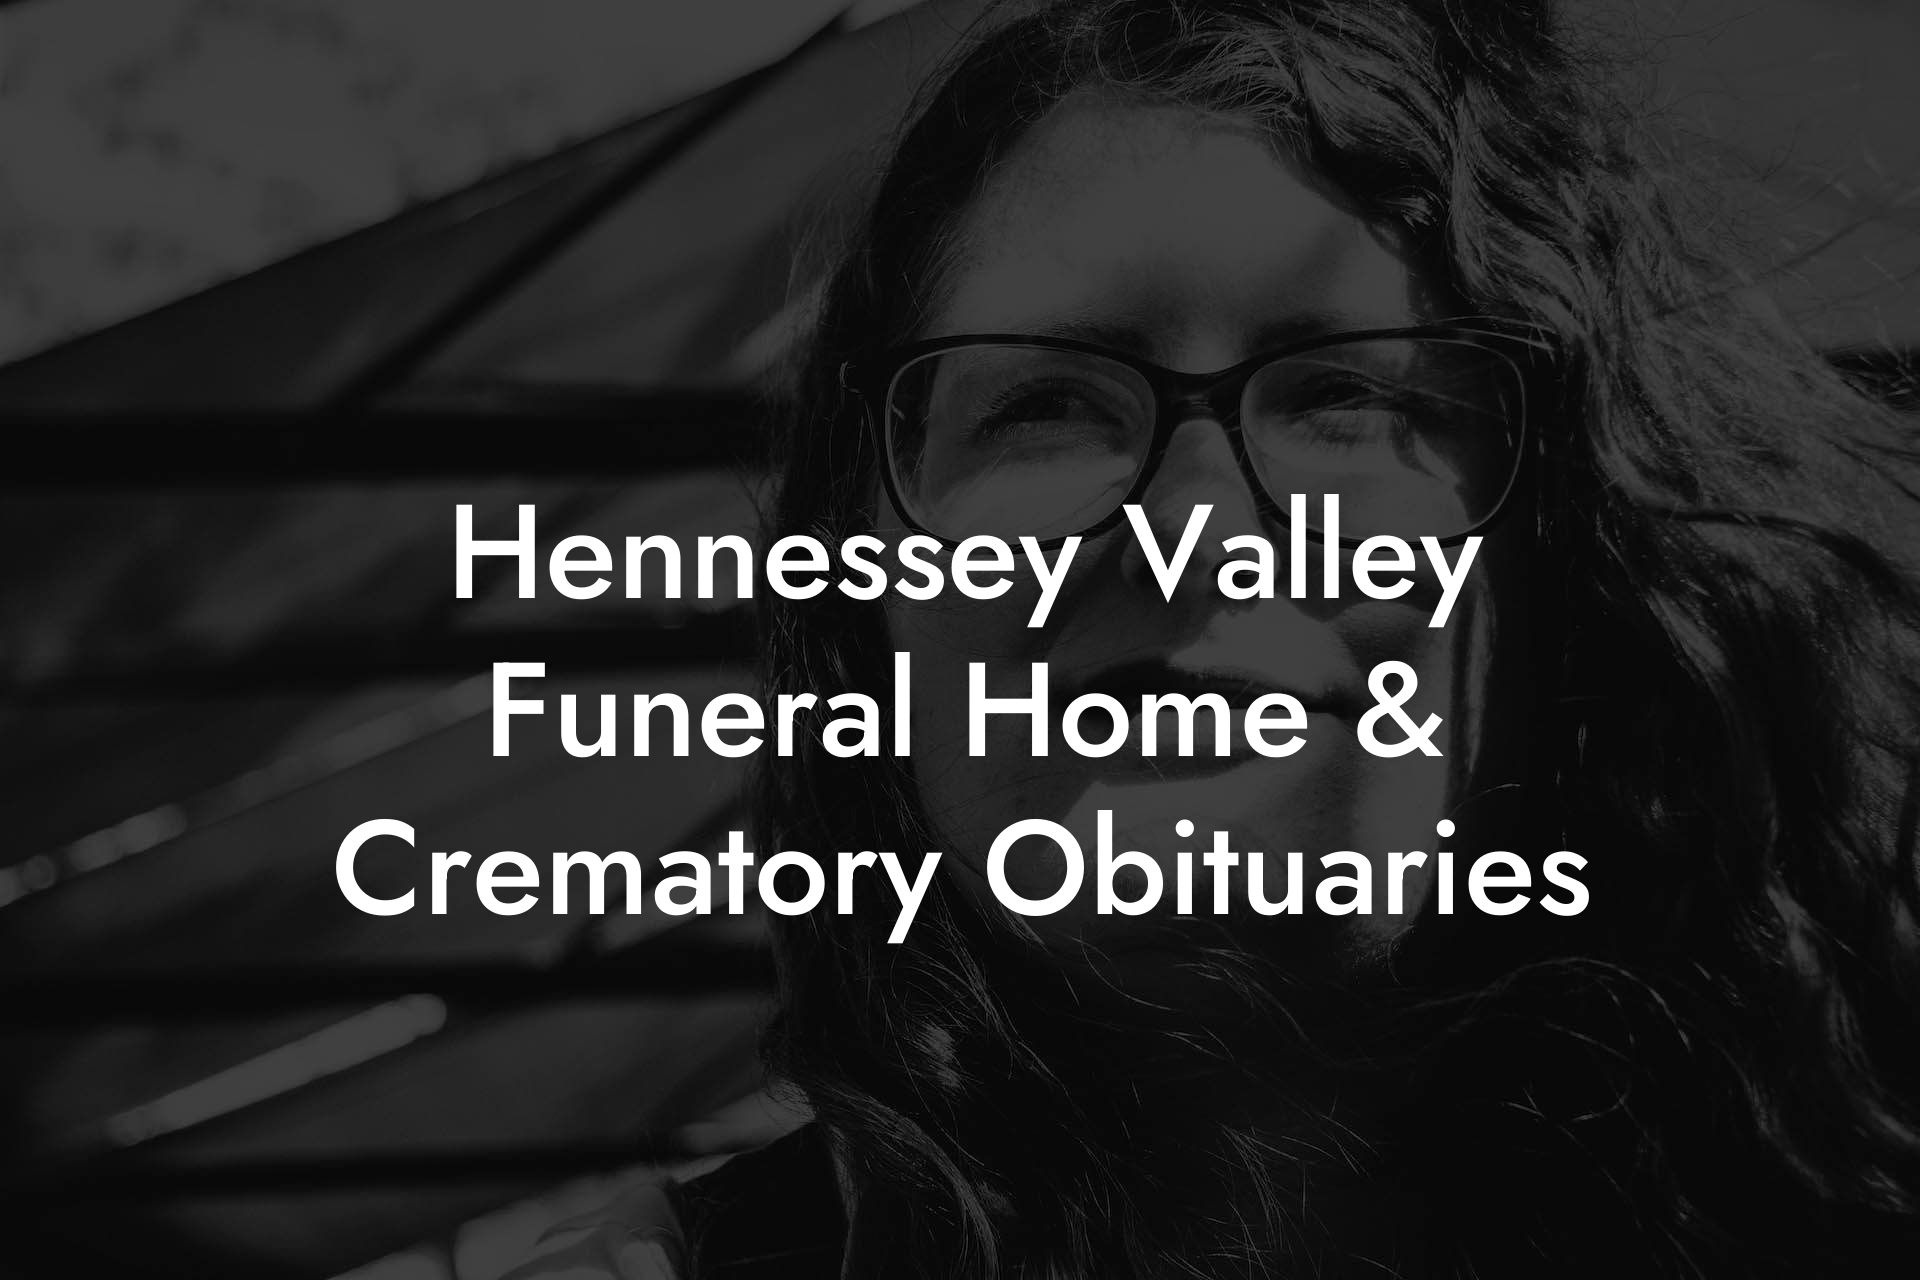 Hennessey Valley Funeral Home & Crematory Obituaries